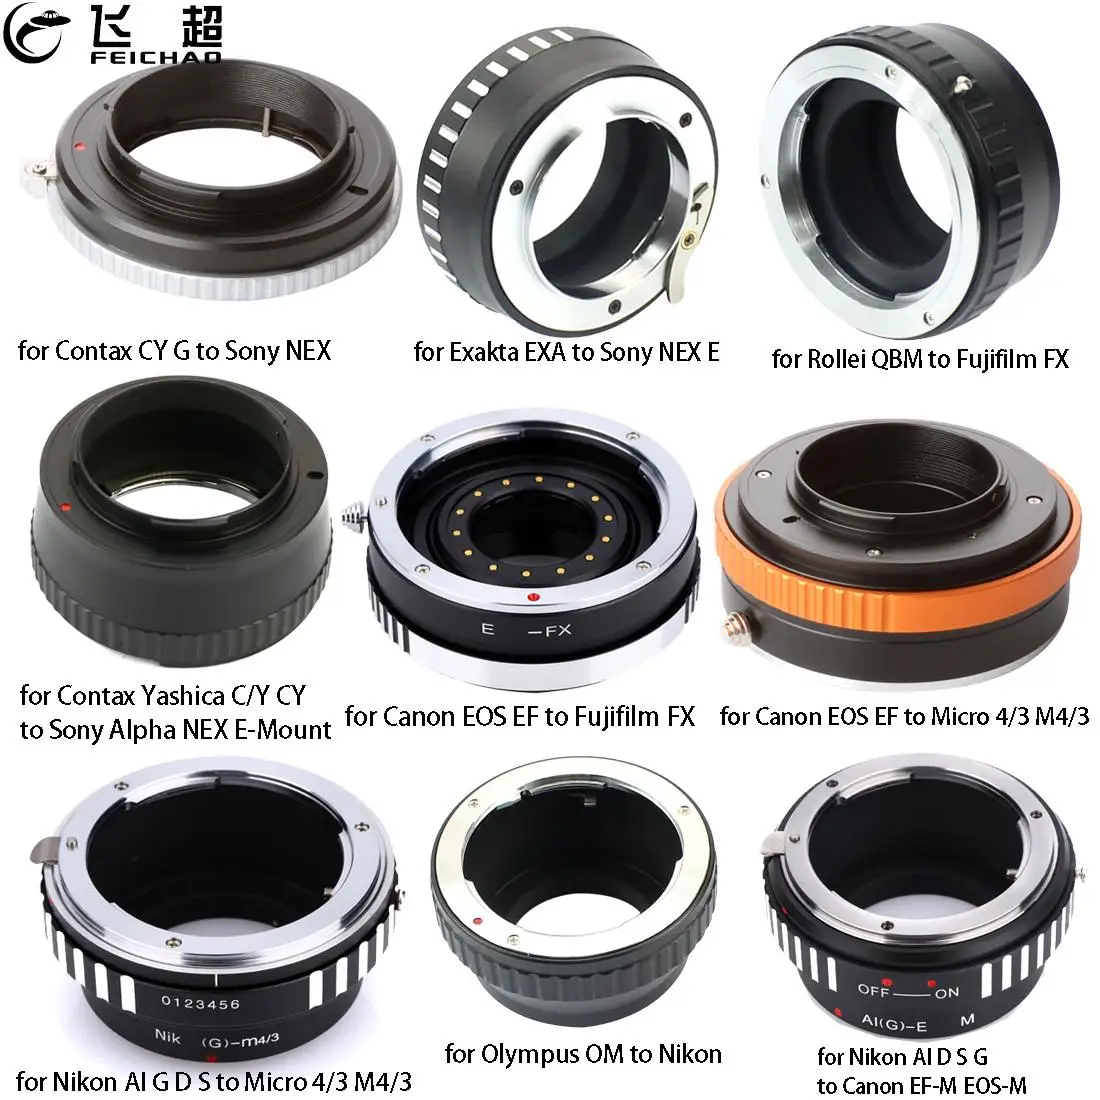 DSLR Camera Lens Adapter Ring Aperture Mount for Contax CY G for Sony NEX E for Canon EOS EF for Fuji for Micro 4/3 OM for Nikon